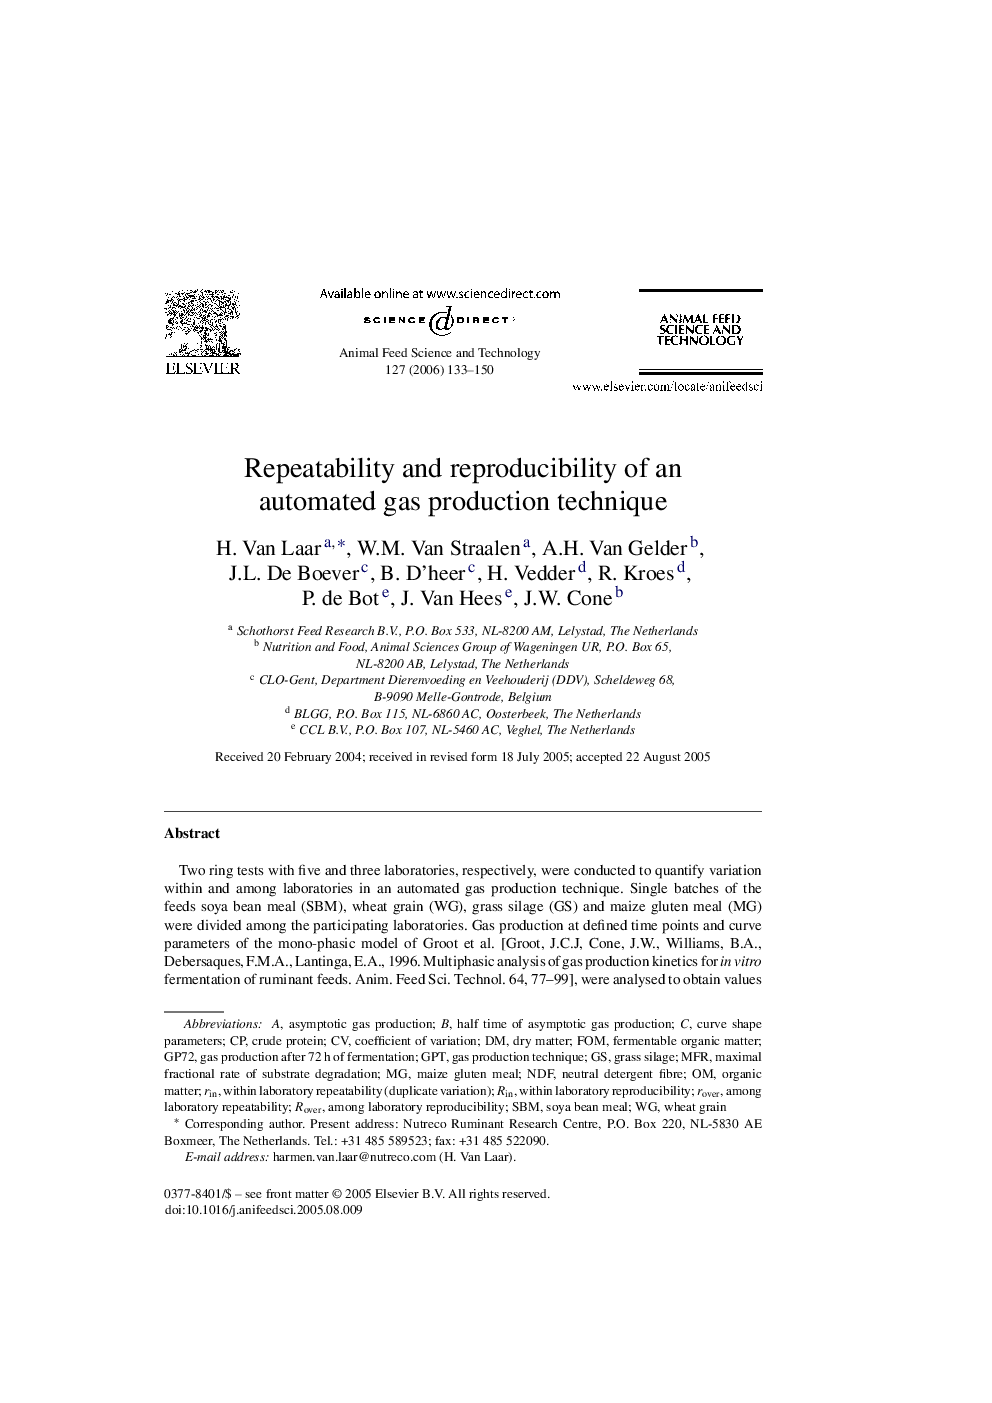 Repeatability and reproducibility of an automated gas production technique